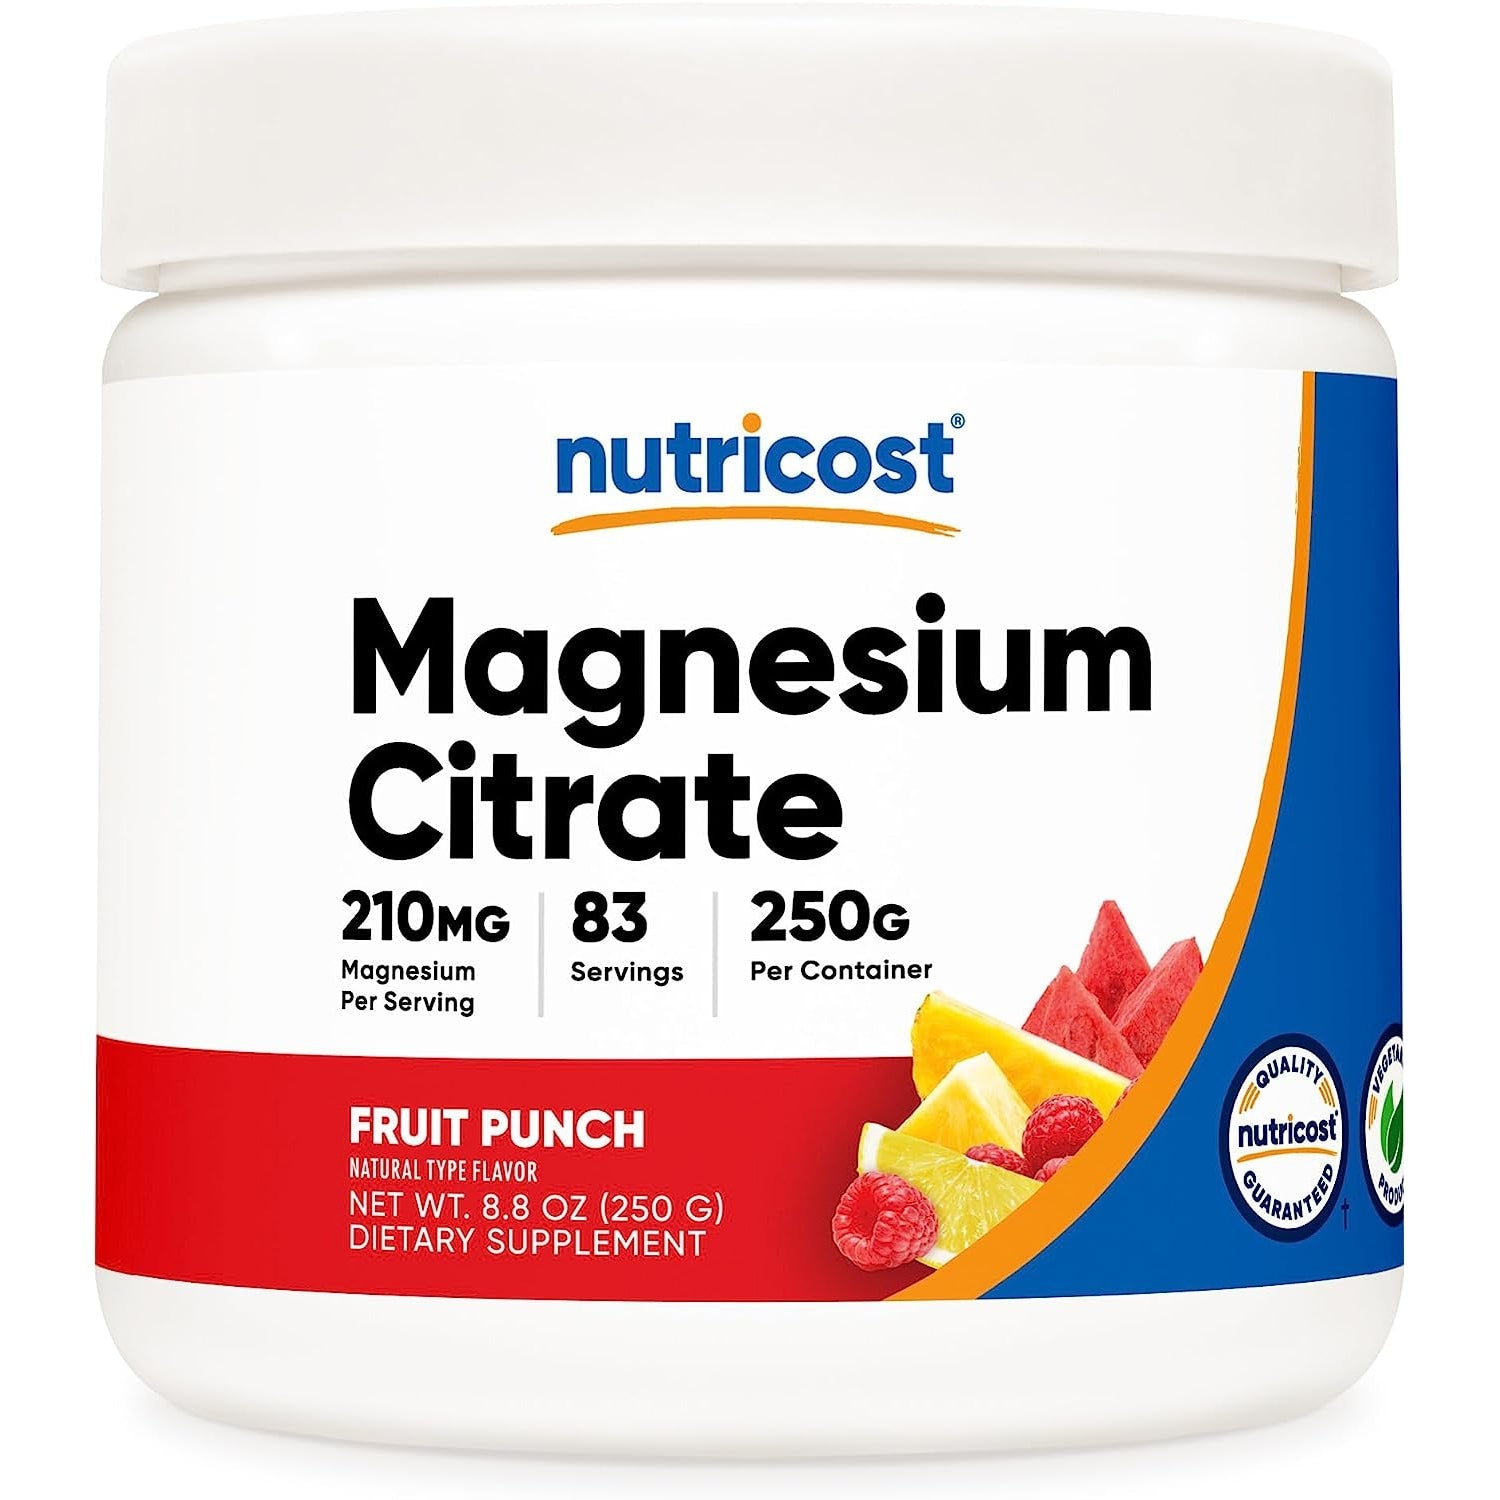 Nutricost Magnesium Citrate Powder Fruit Punch Non-GMO Gluten Free 250g